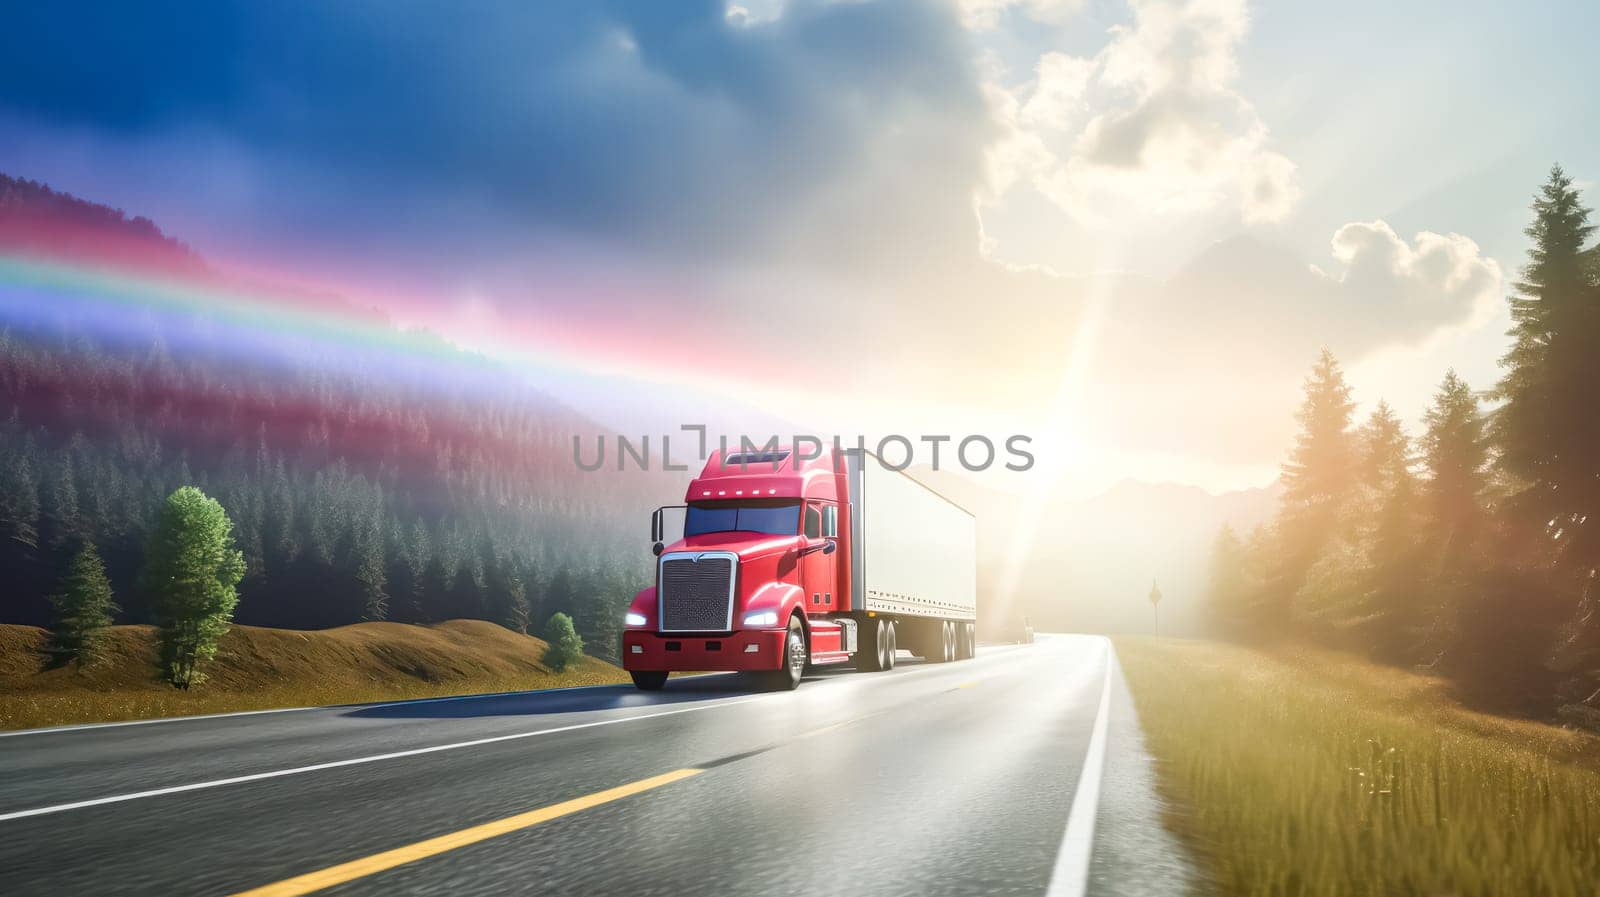 A white truck drives along a highway winding through a forested landscape adorned with autumn colors, creating a picturesque scene at sunset.